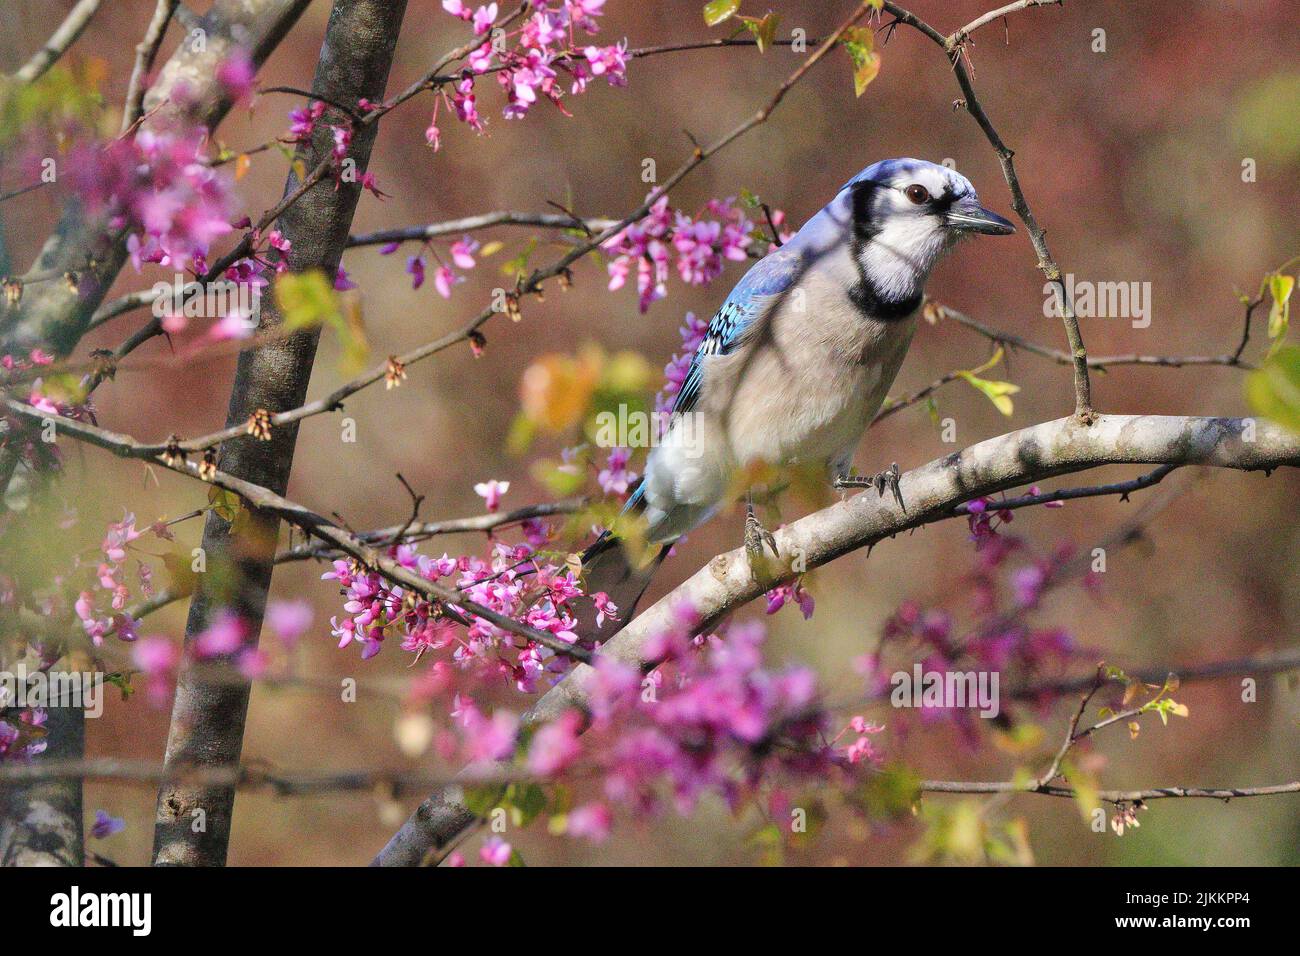 A close-up shot of a Blue jay perched on a tree twig on a blurred background Stock Photo